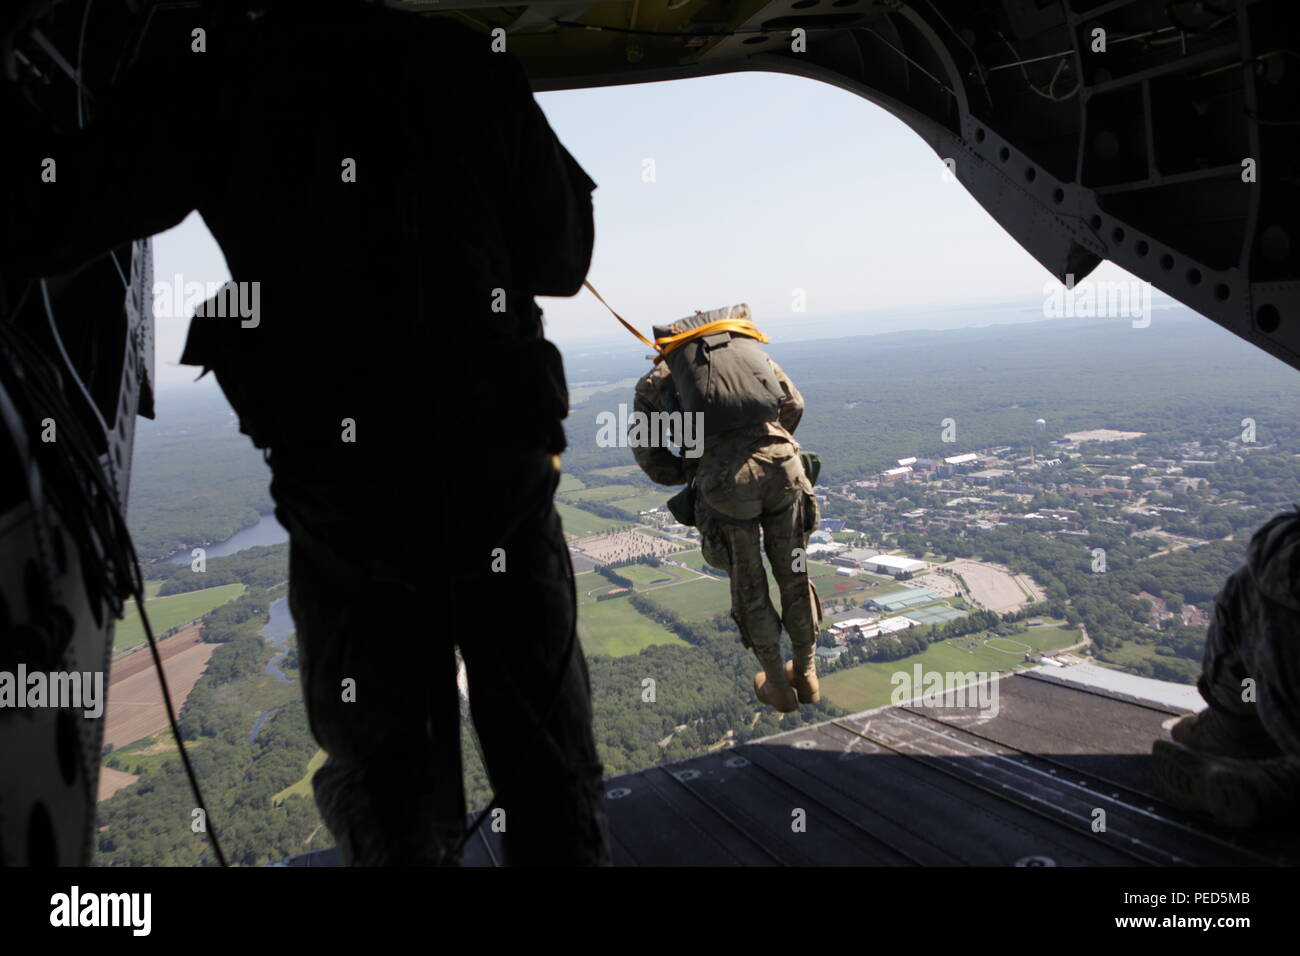 U.S. Army Sgt. Austin Berner from the 982 COMCAM and his team from the United Kingdom jump from a CH-47 helicopter at Leapfest 2015, Aug. 1, 2015.  Leapfest is an International parachute competition hosted by the 56th Troop Command, Rhode Island National Guard to promote high level technical training and esprit de corps within the International Airborne community. (U.S. Army Photo by Sgt. 1st Class Horace Murray/Released) Stock Photo